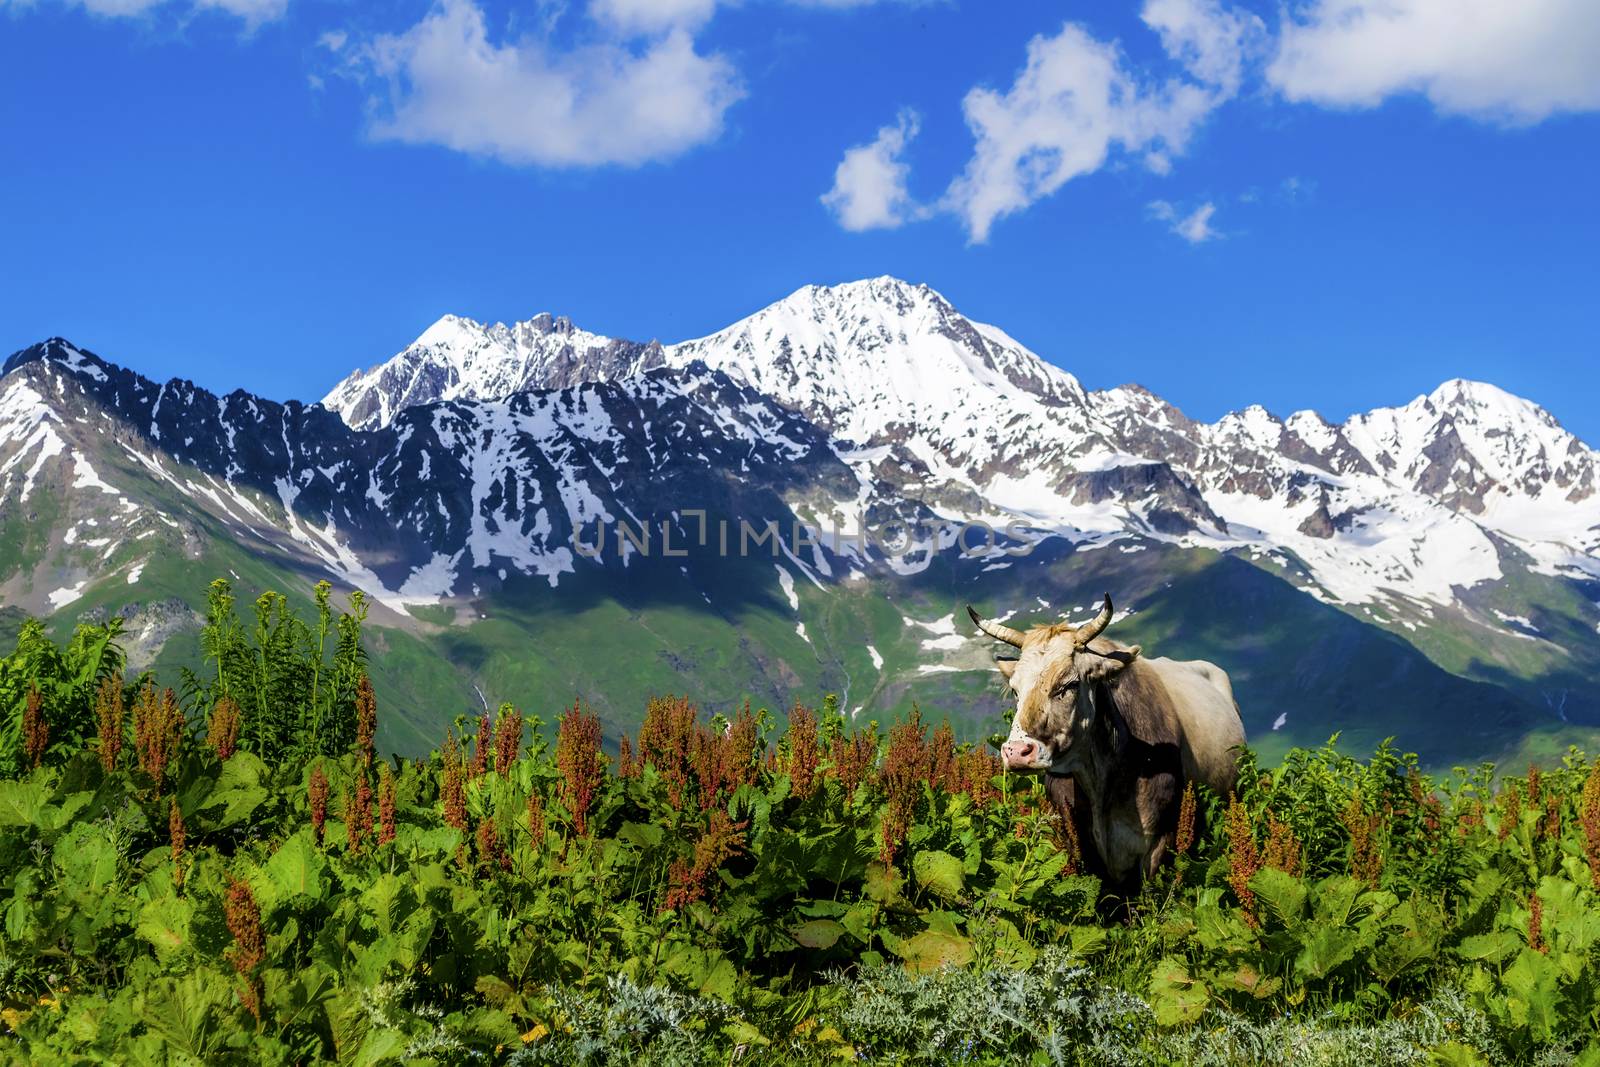 Wild cow against the background of the mountains. The shadow of the clouds falls on snow-capped mountains. Summer in Svaneti, Georgia.